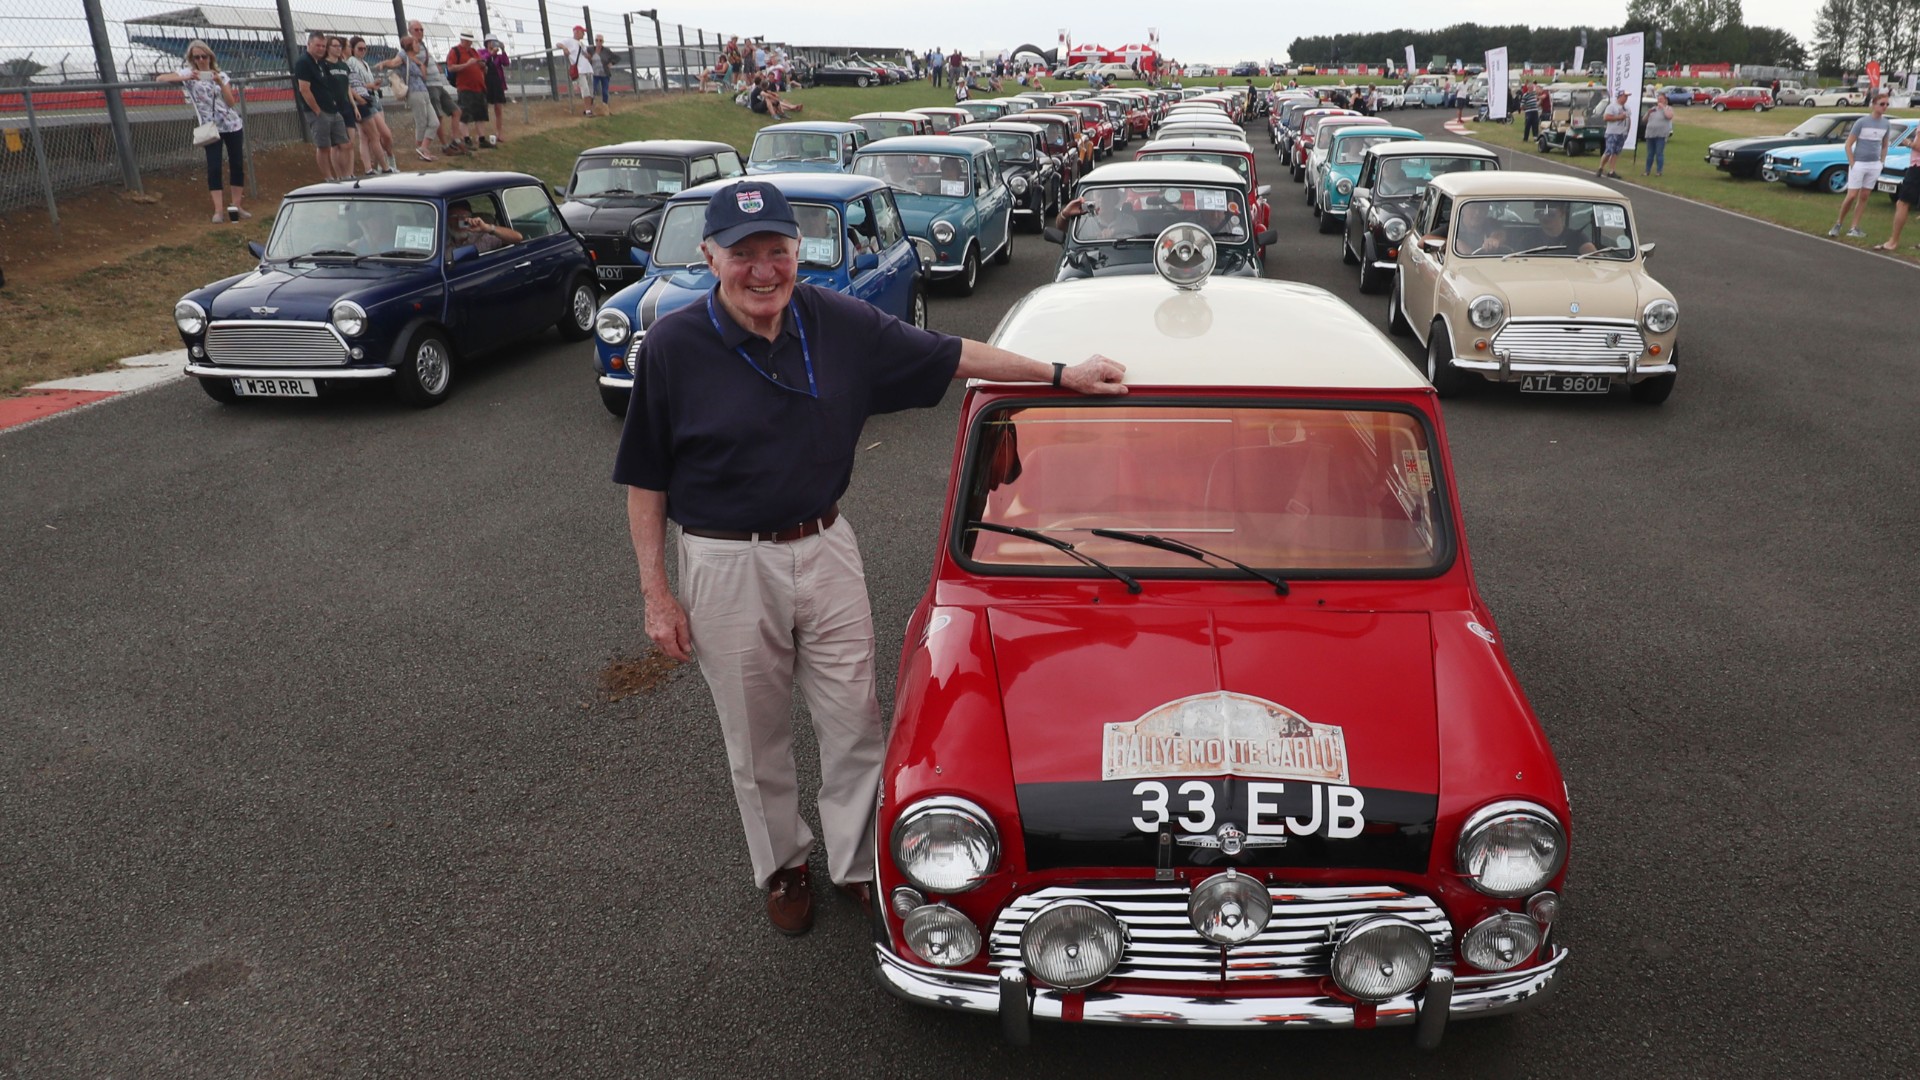 Minis at Silverstone Classic